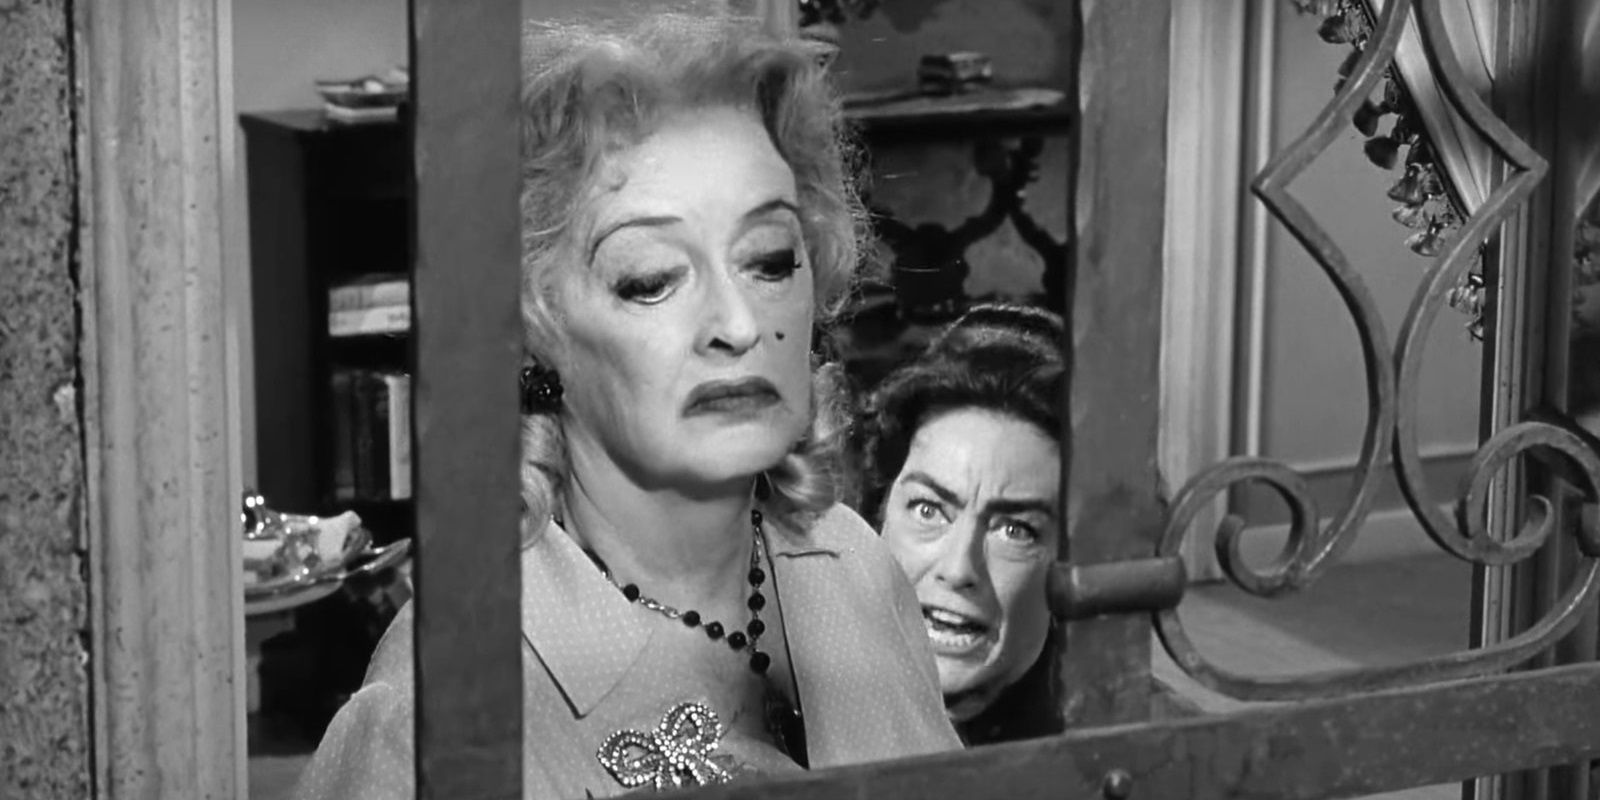 Bette Davis and Joan Crawford together at a window in What Ever Happened to Baby Jane